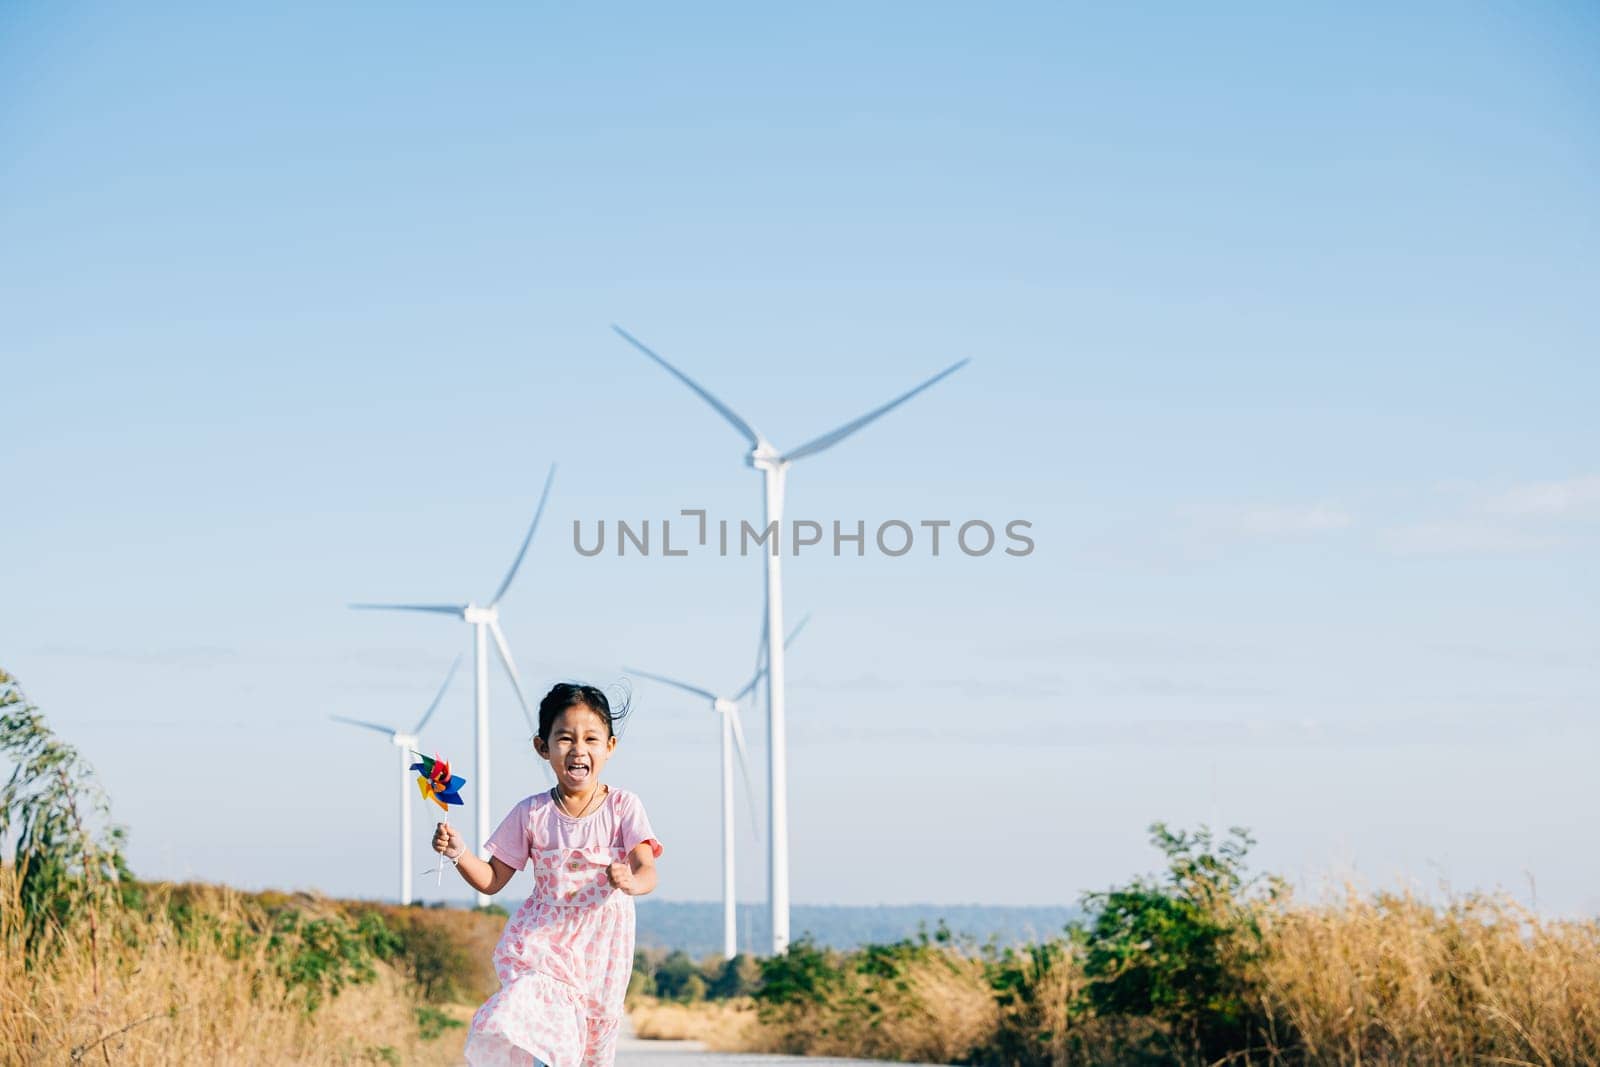 A cheerful girl runs near windmills holding pinwheels with joy. Embracing playful wind energy education in a picturesque wind turbine setting under a clear sunny sky.